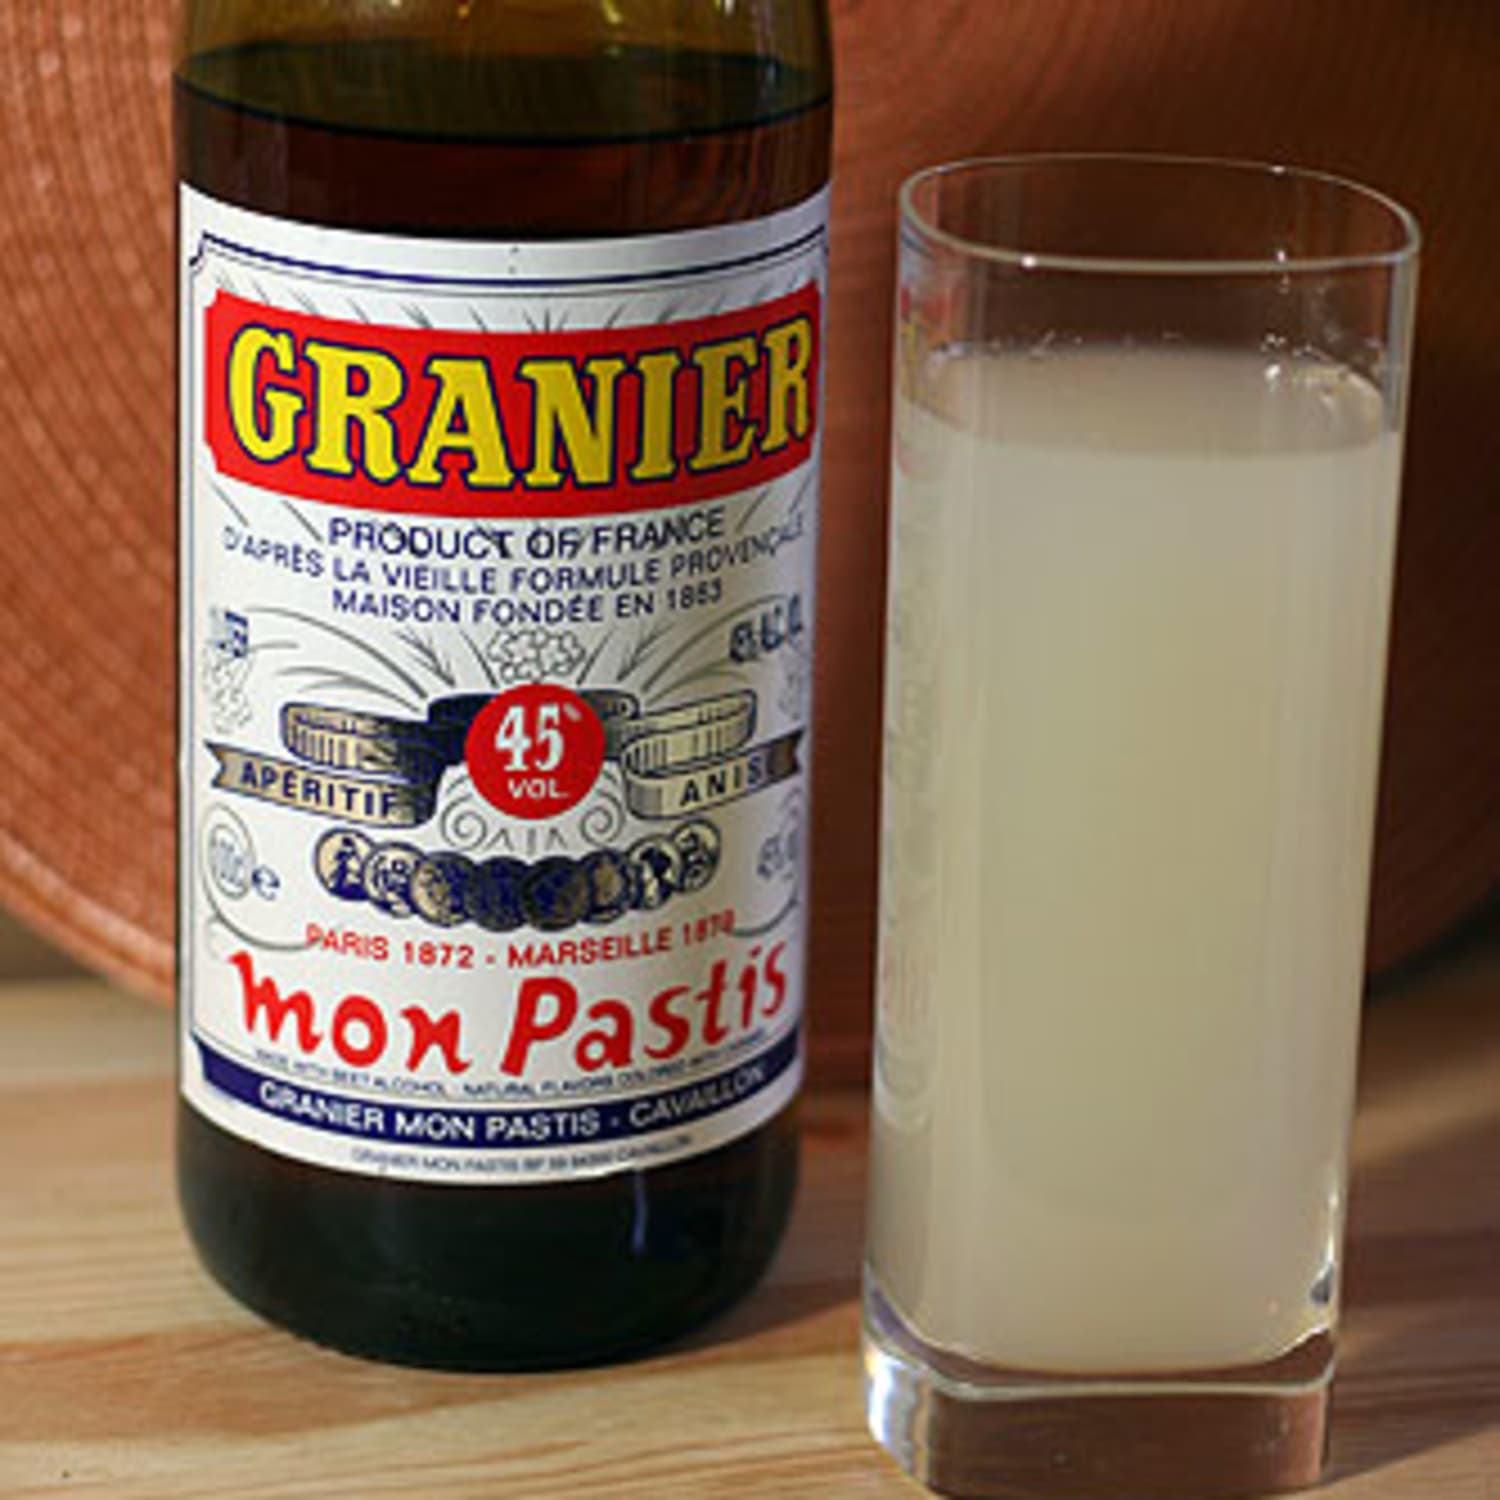 Summer in a glass; Absinthe and Pastis